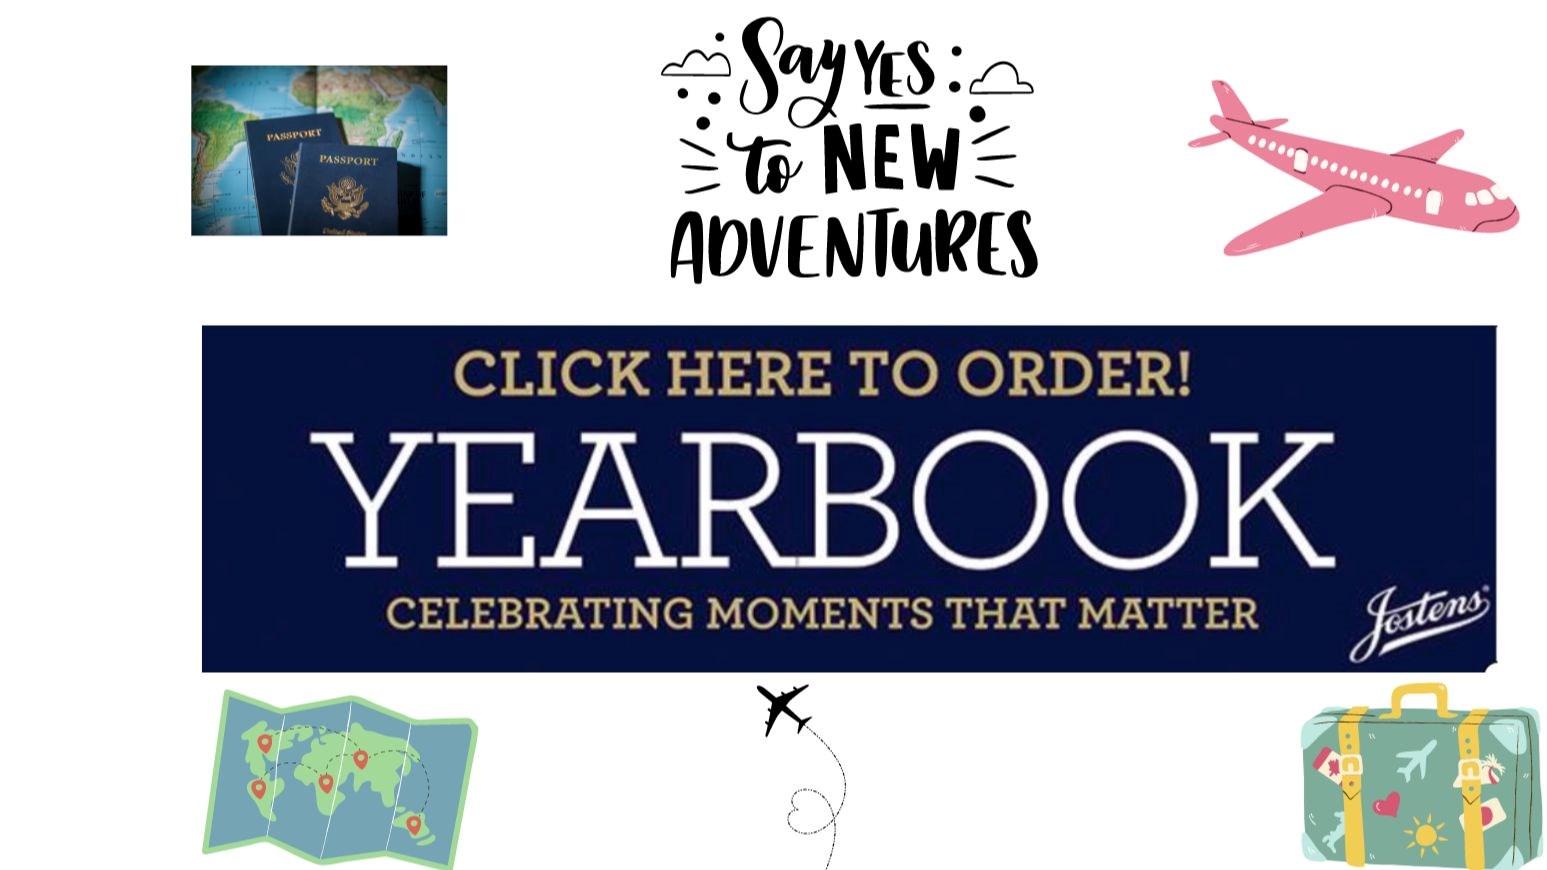 image of ad for yearbook